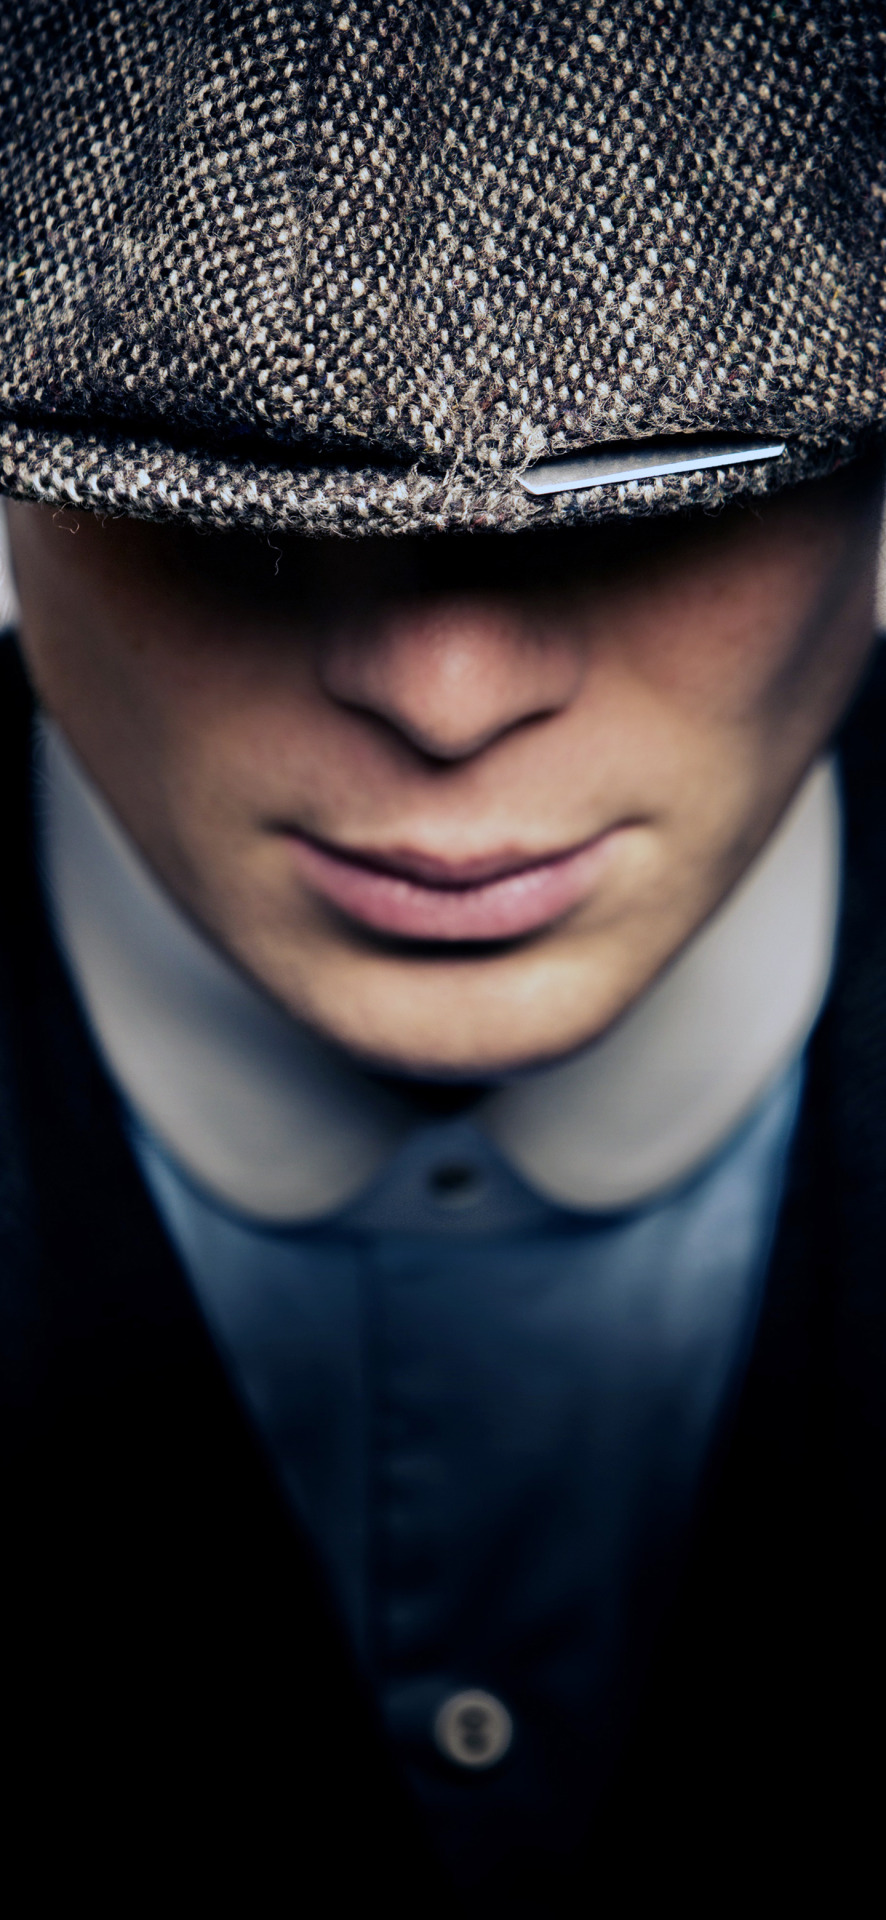 Free download Peaky Blinders Wallpaper in 2020 With image Peaky blinders [886x1920] for your Desktop, Mobile & Tablet. Explore Tommy Shelby Close Up HD Wallpaper. Tommy Shelby Close Up